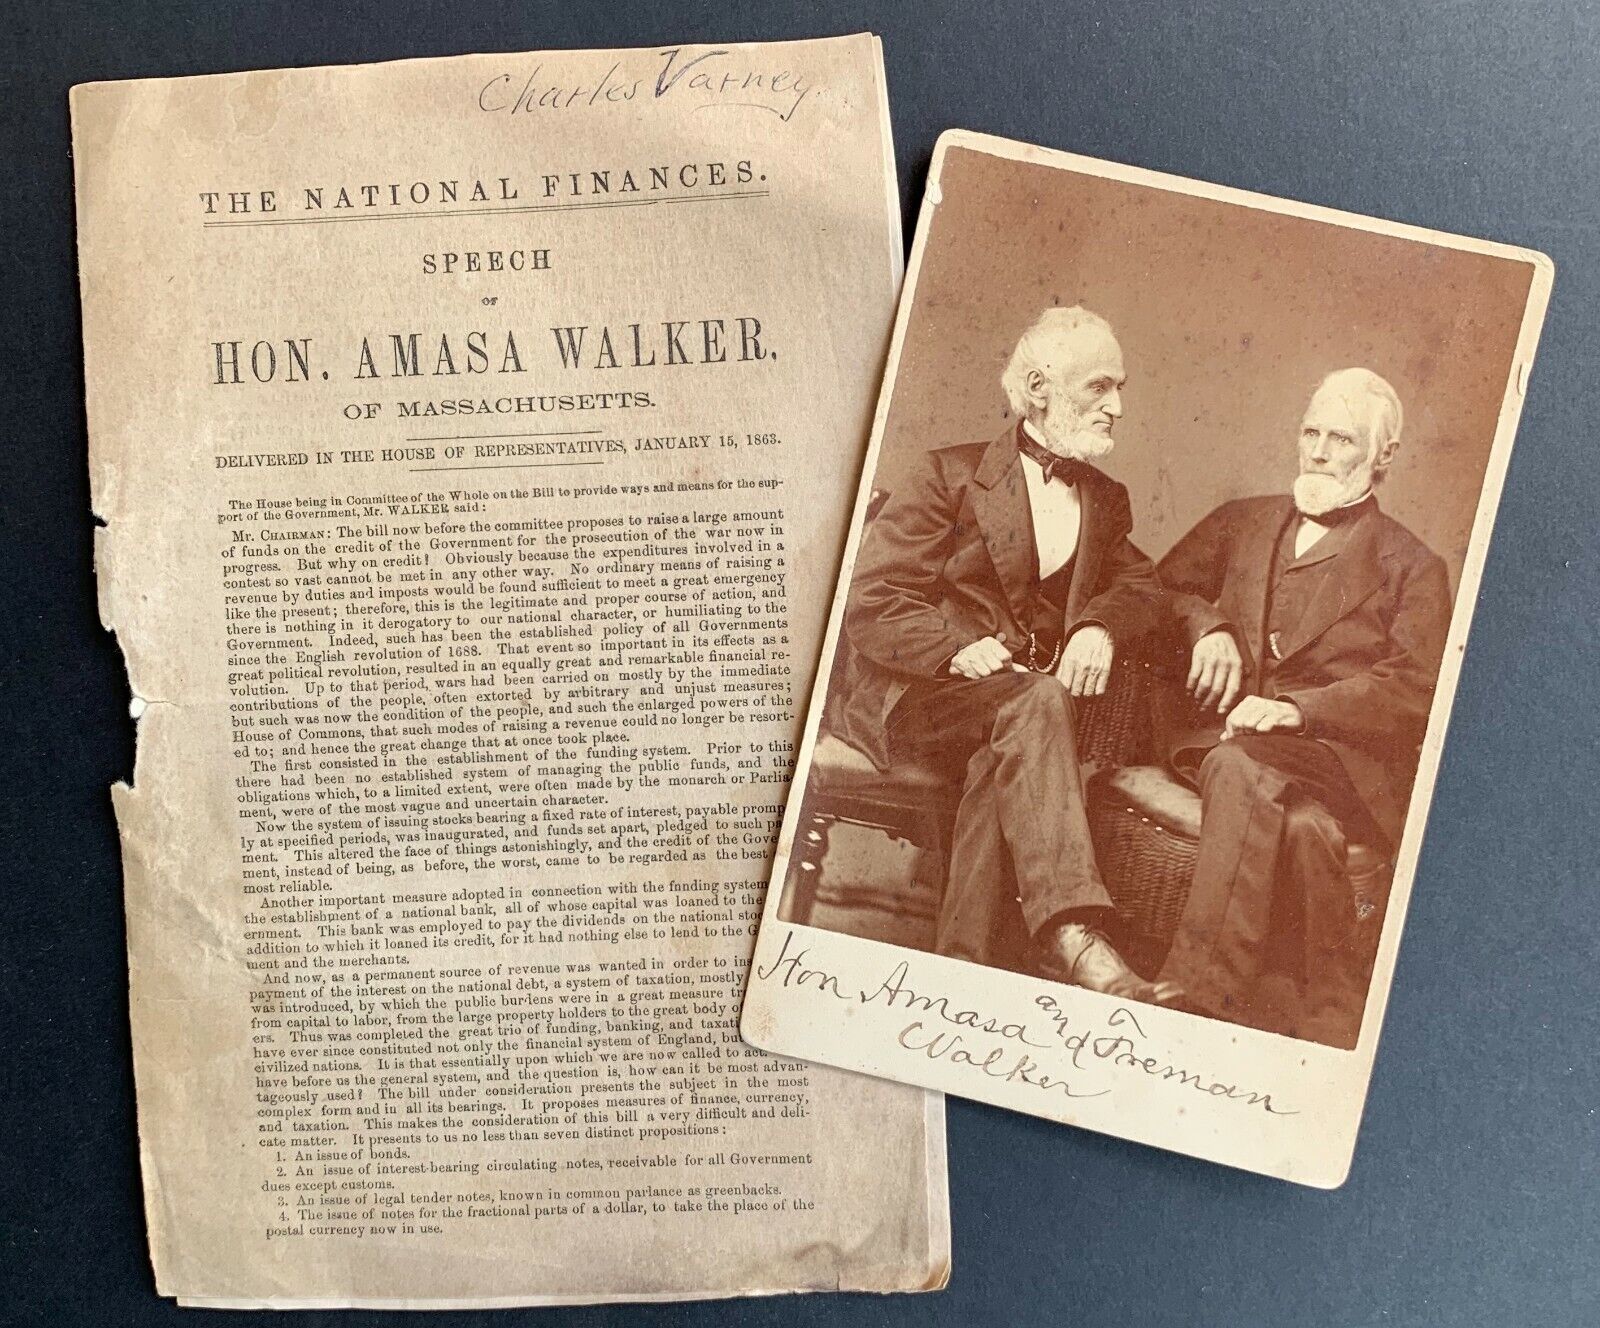 1863 AMASA WALKER PHOTOGRAPH CIVIL WAR TRACT ABOLITIONIST WOMAN SUFFRAGE BANKING